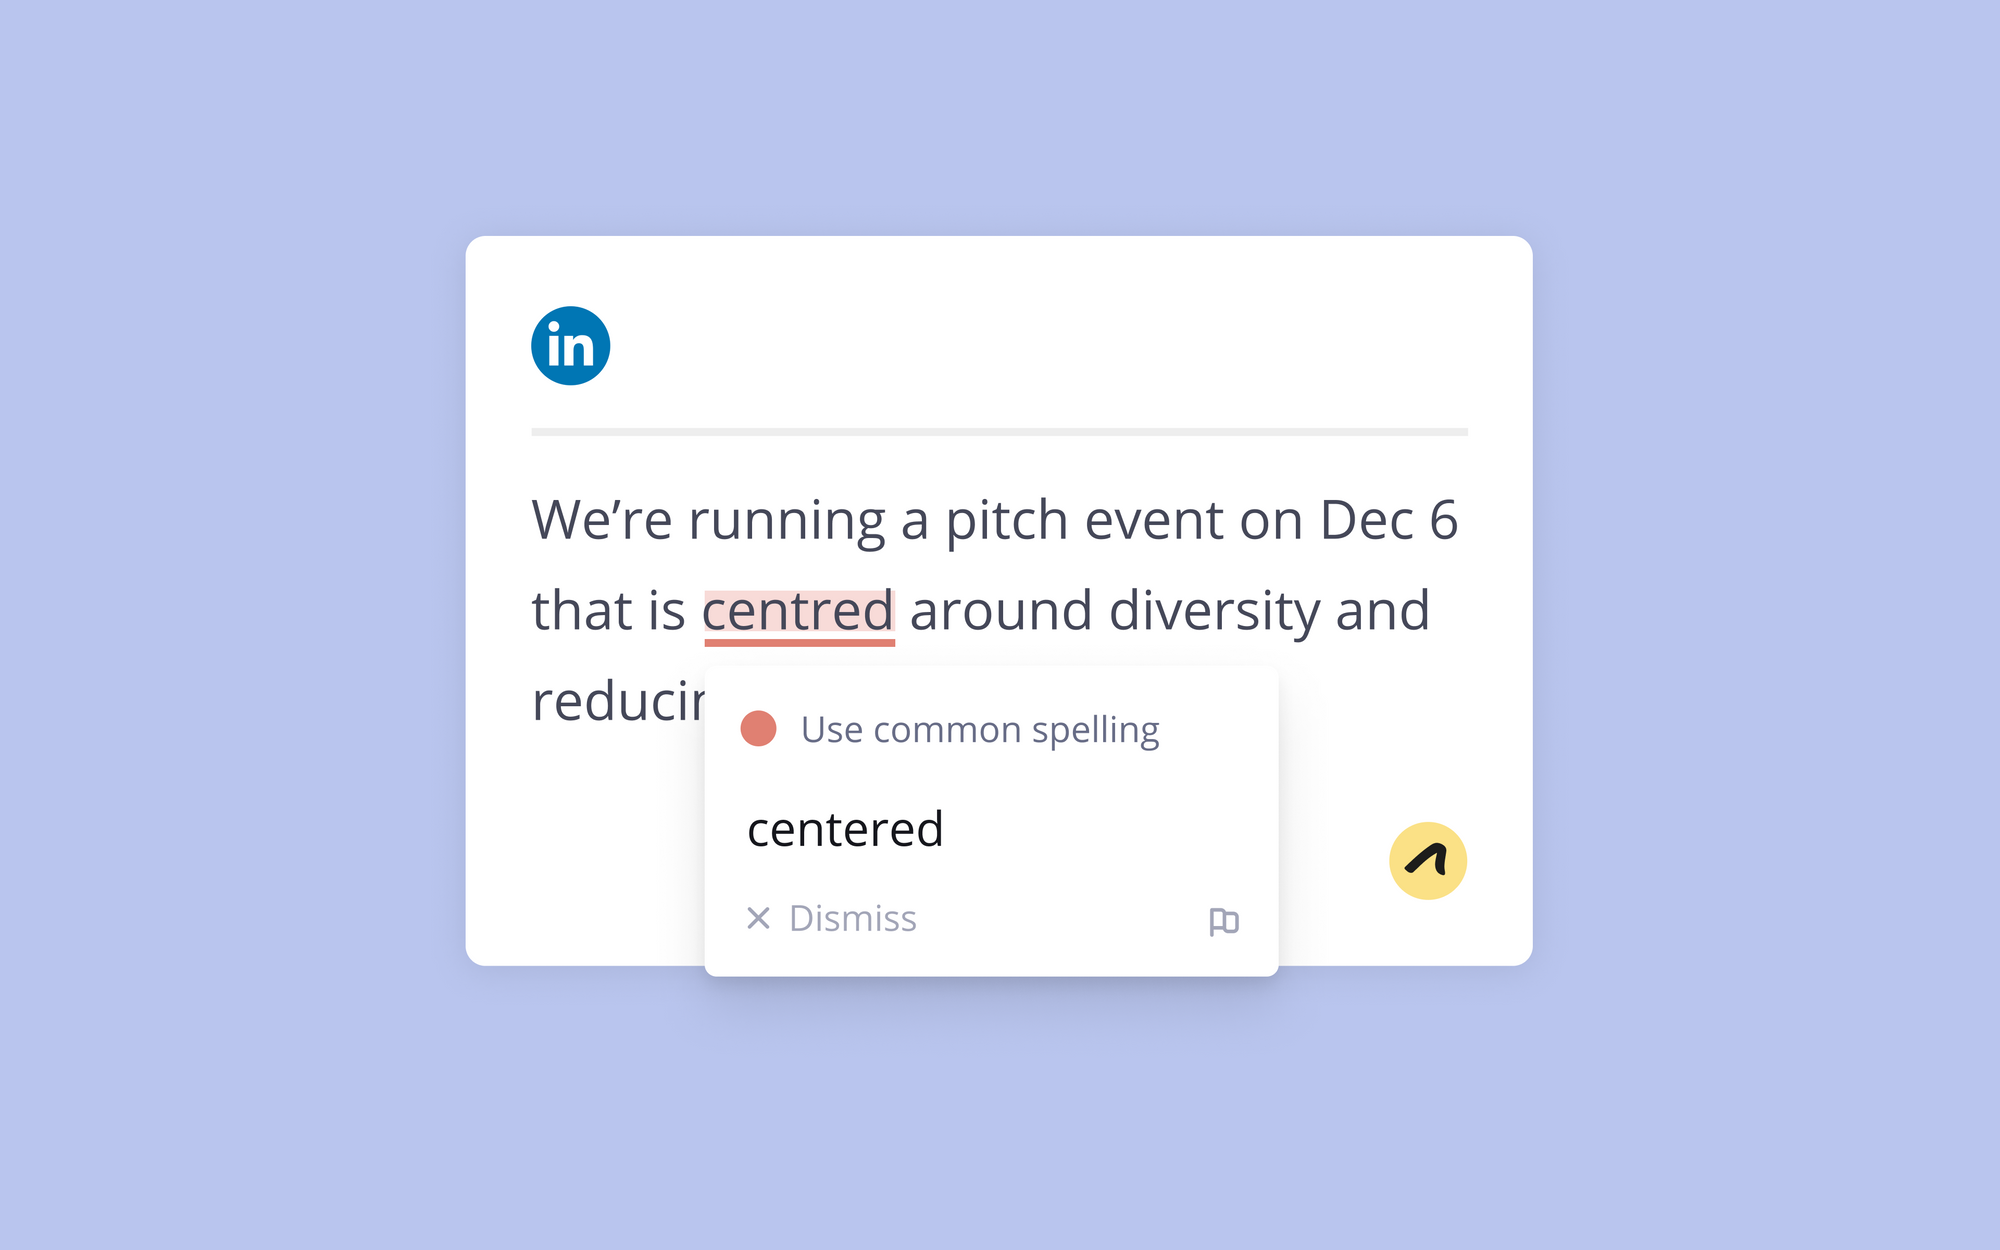 An Outwrite pop up suggests using the common spelling of "centered" instead of "centred"